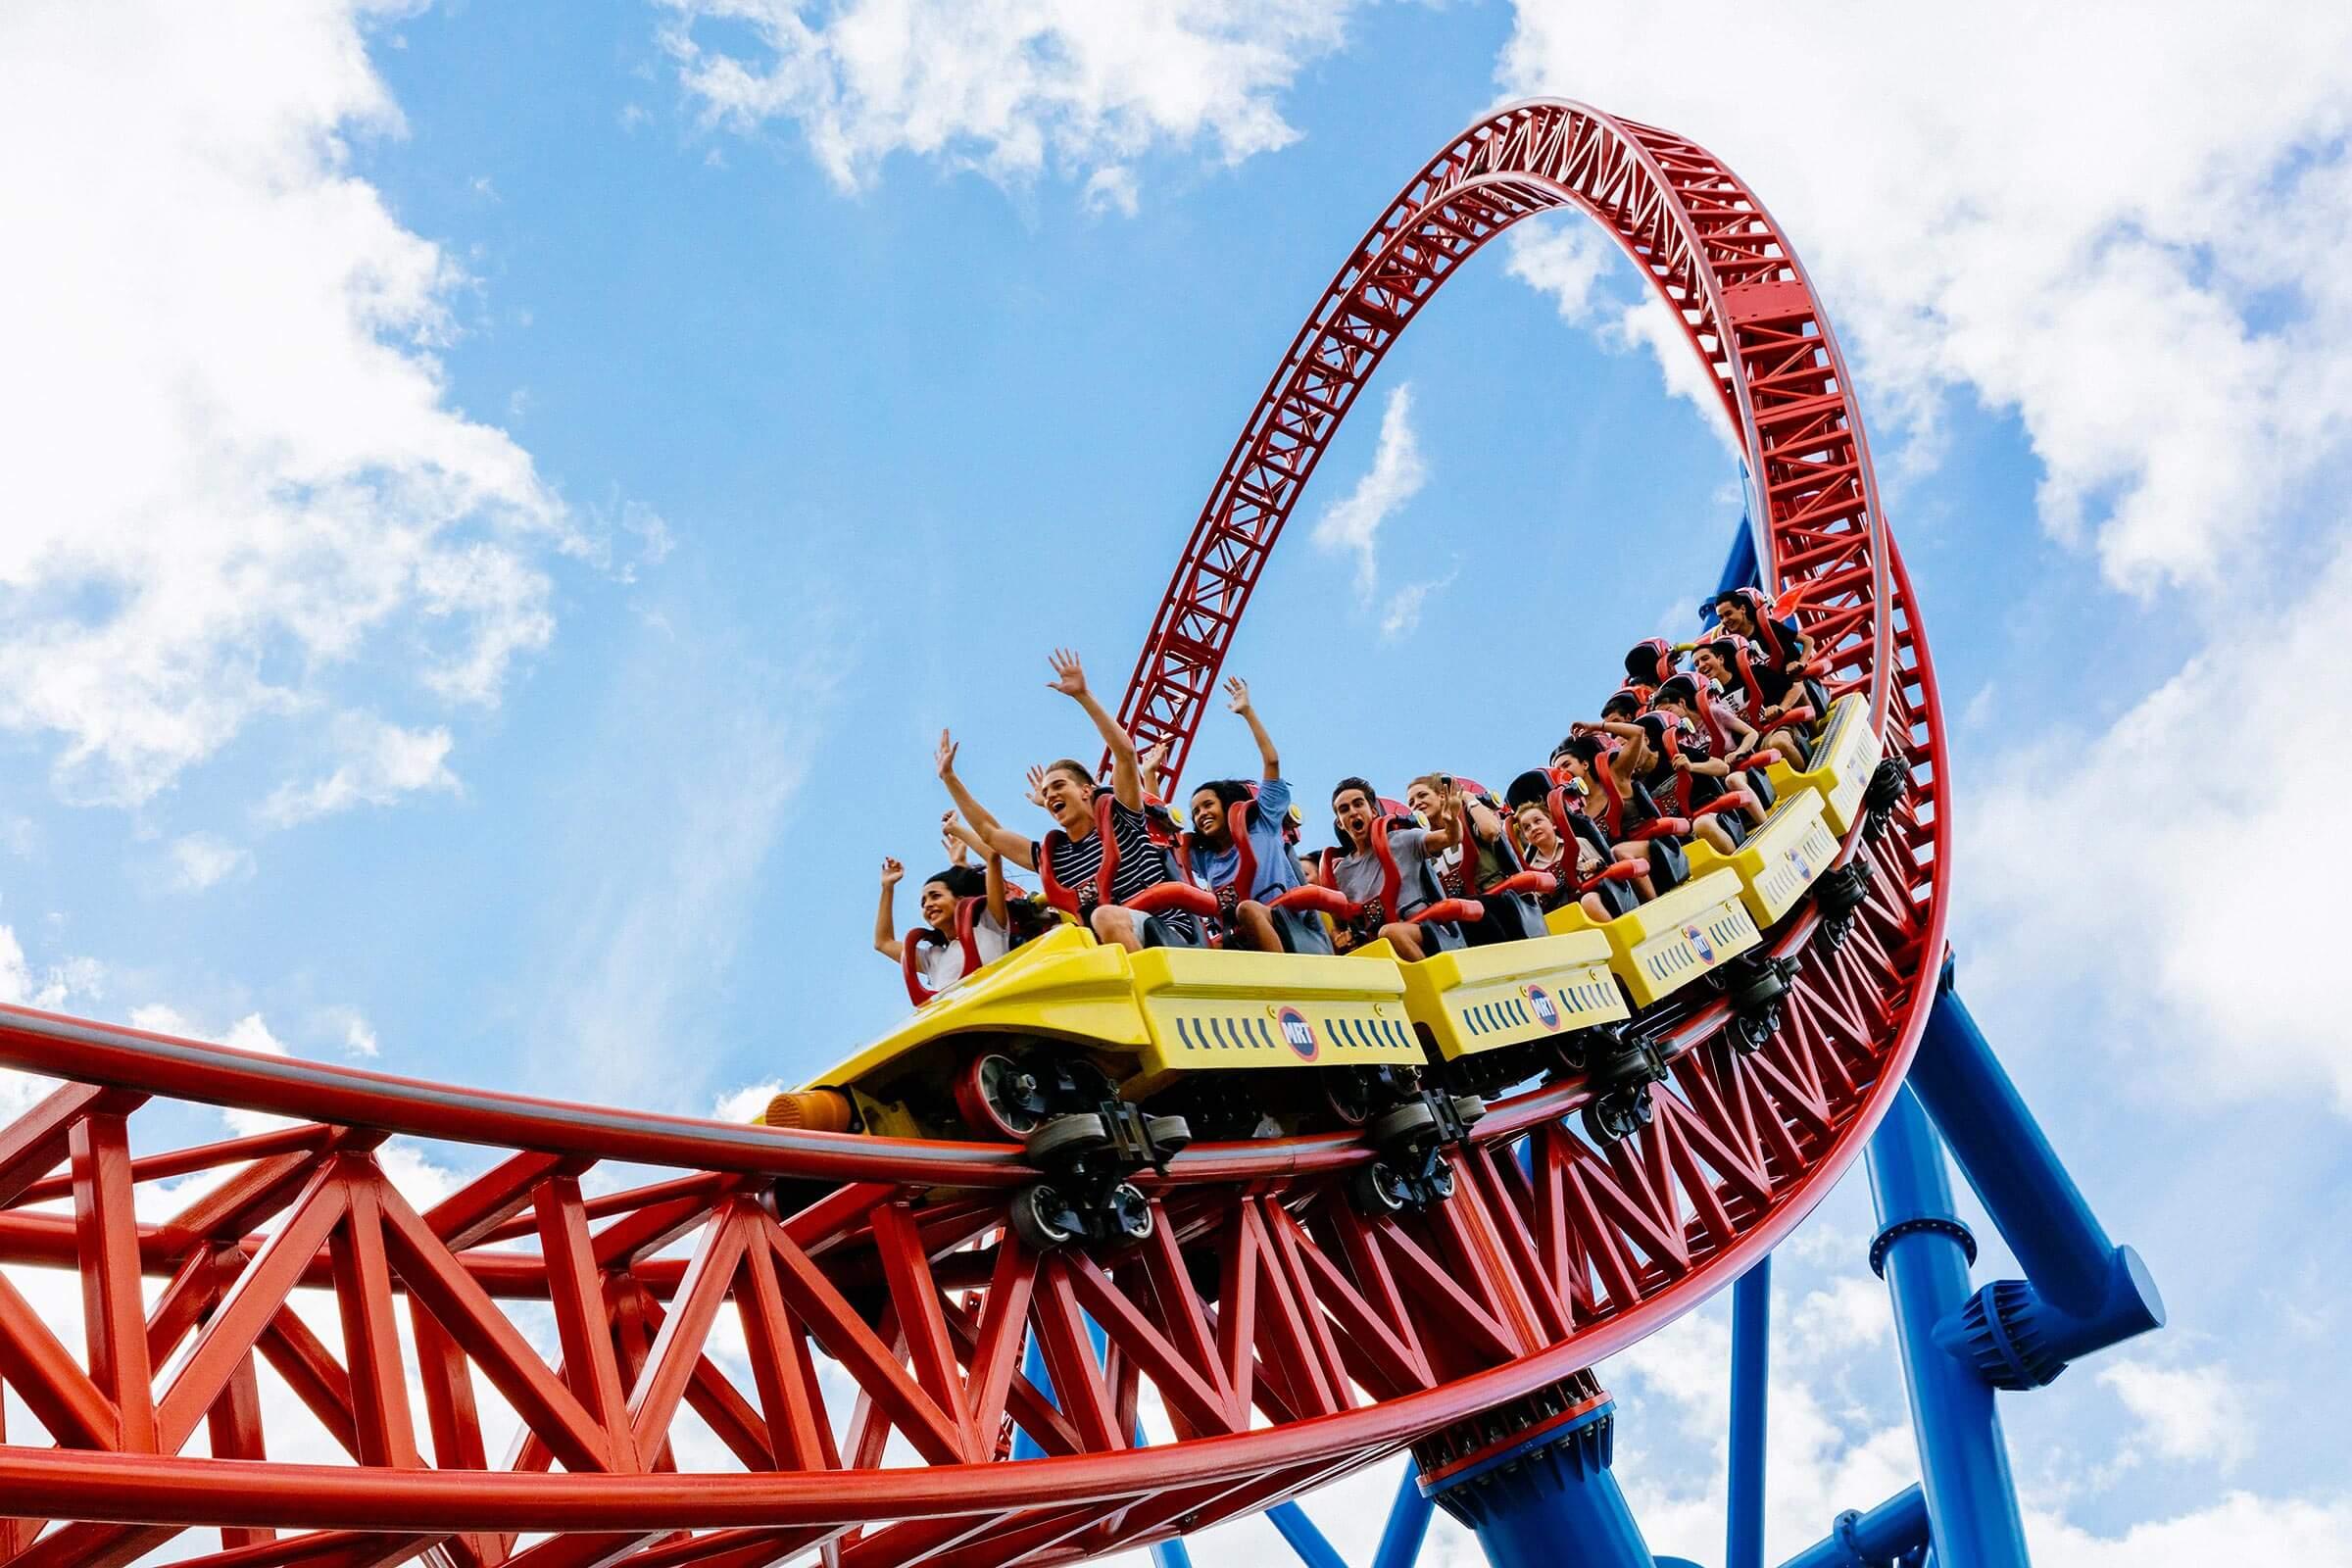 Theme Parks - Book here for Discounted Passes